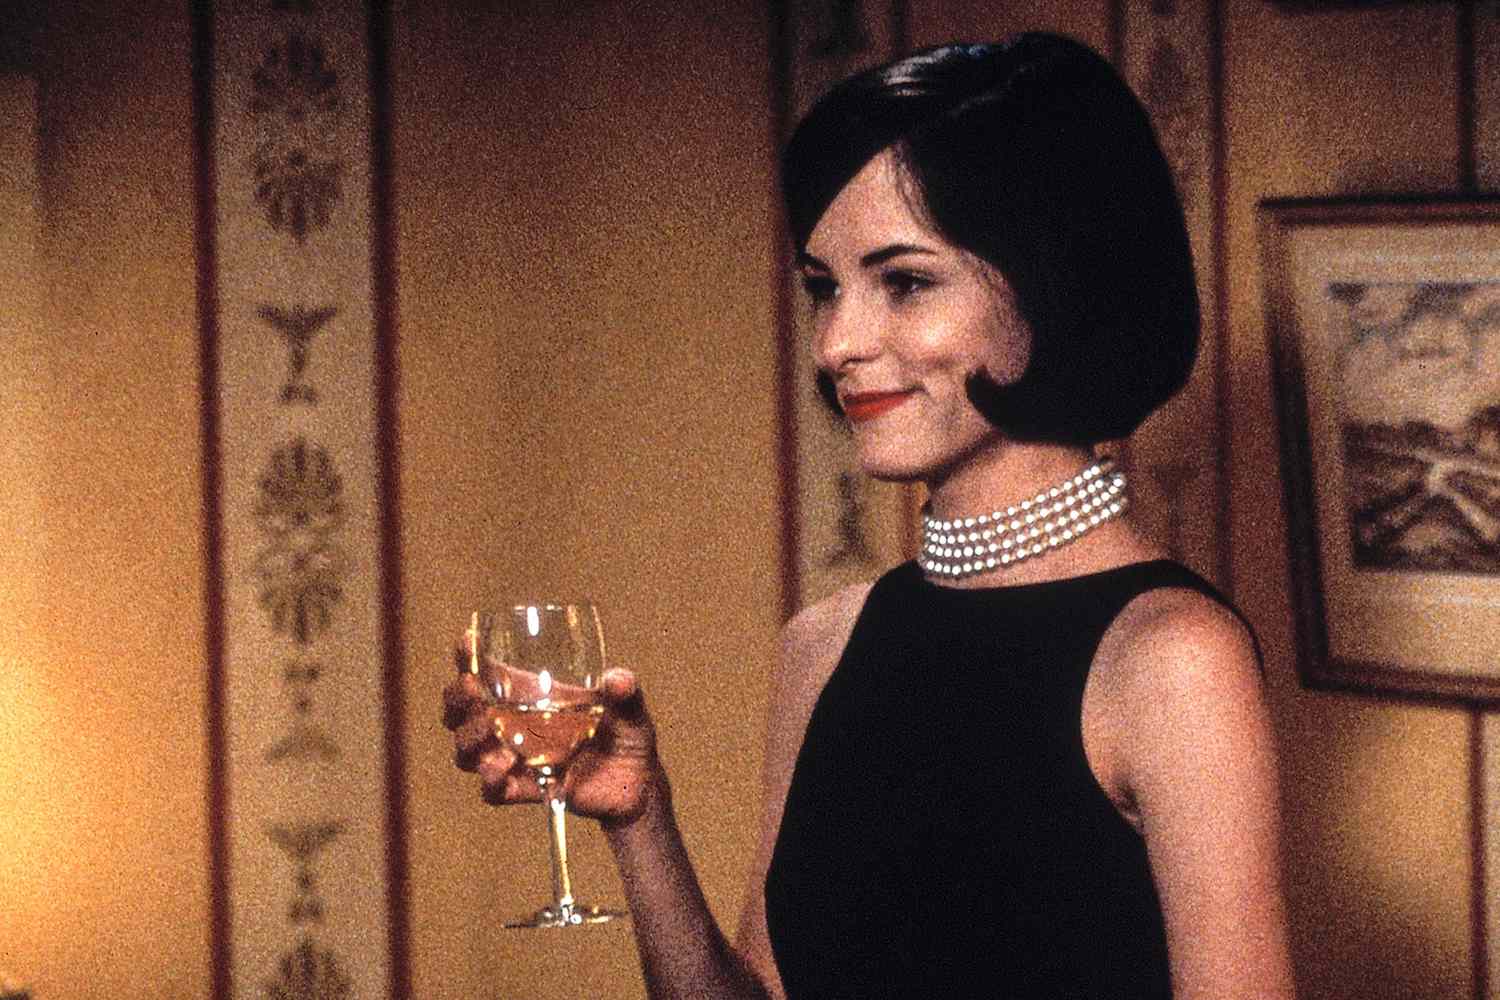 Parker Posey in 'The House of Yes'